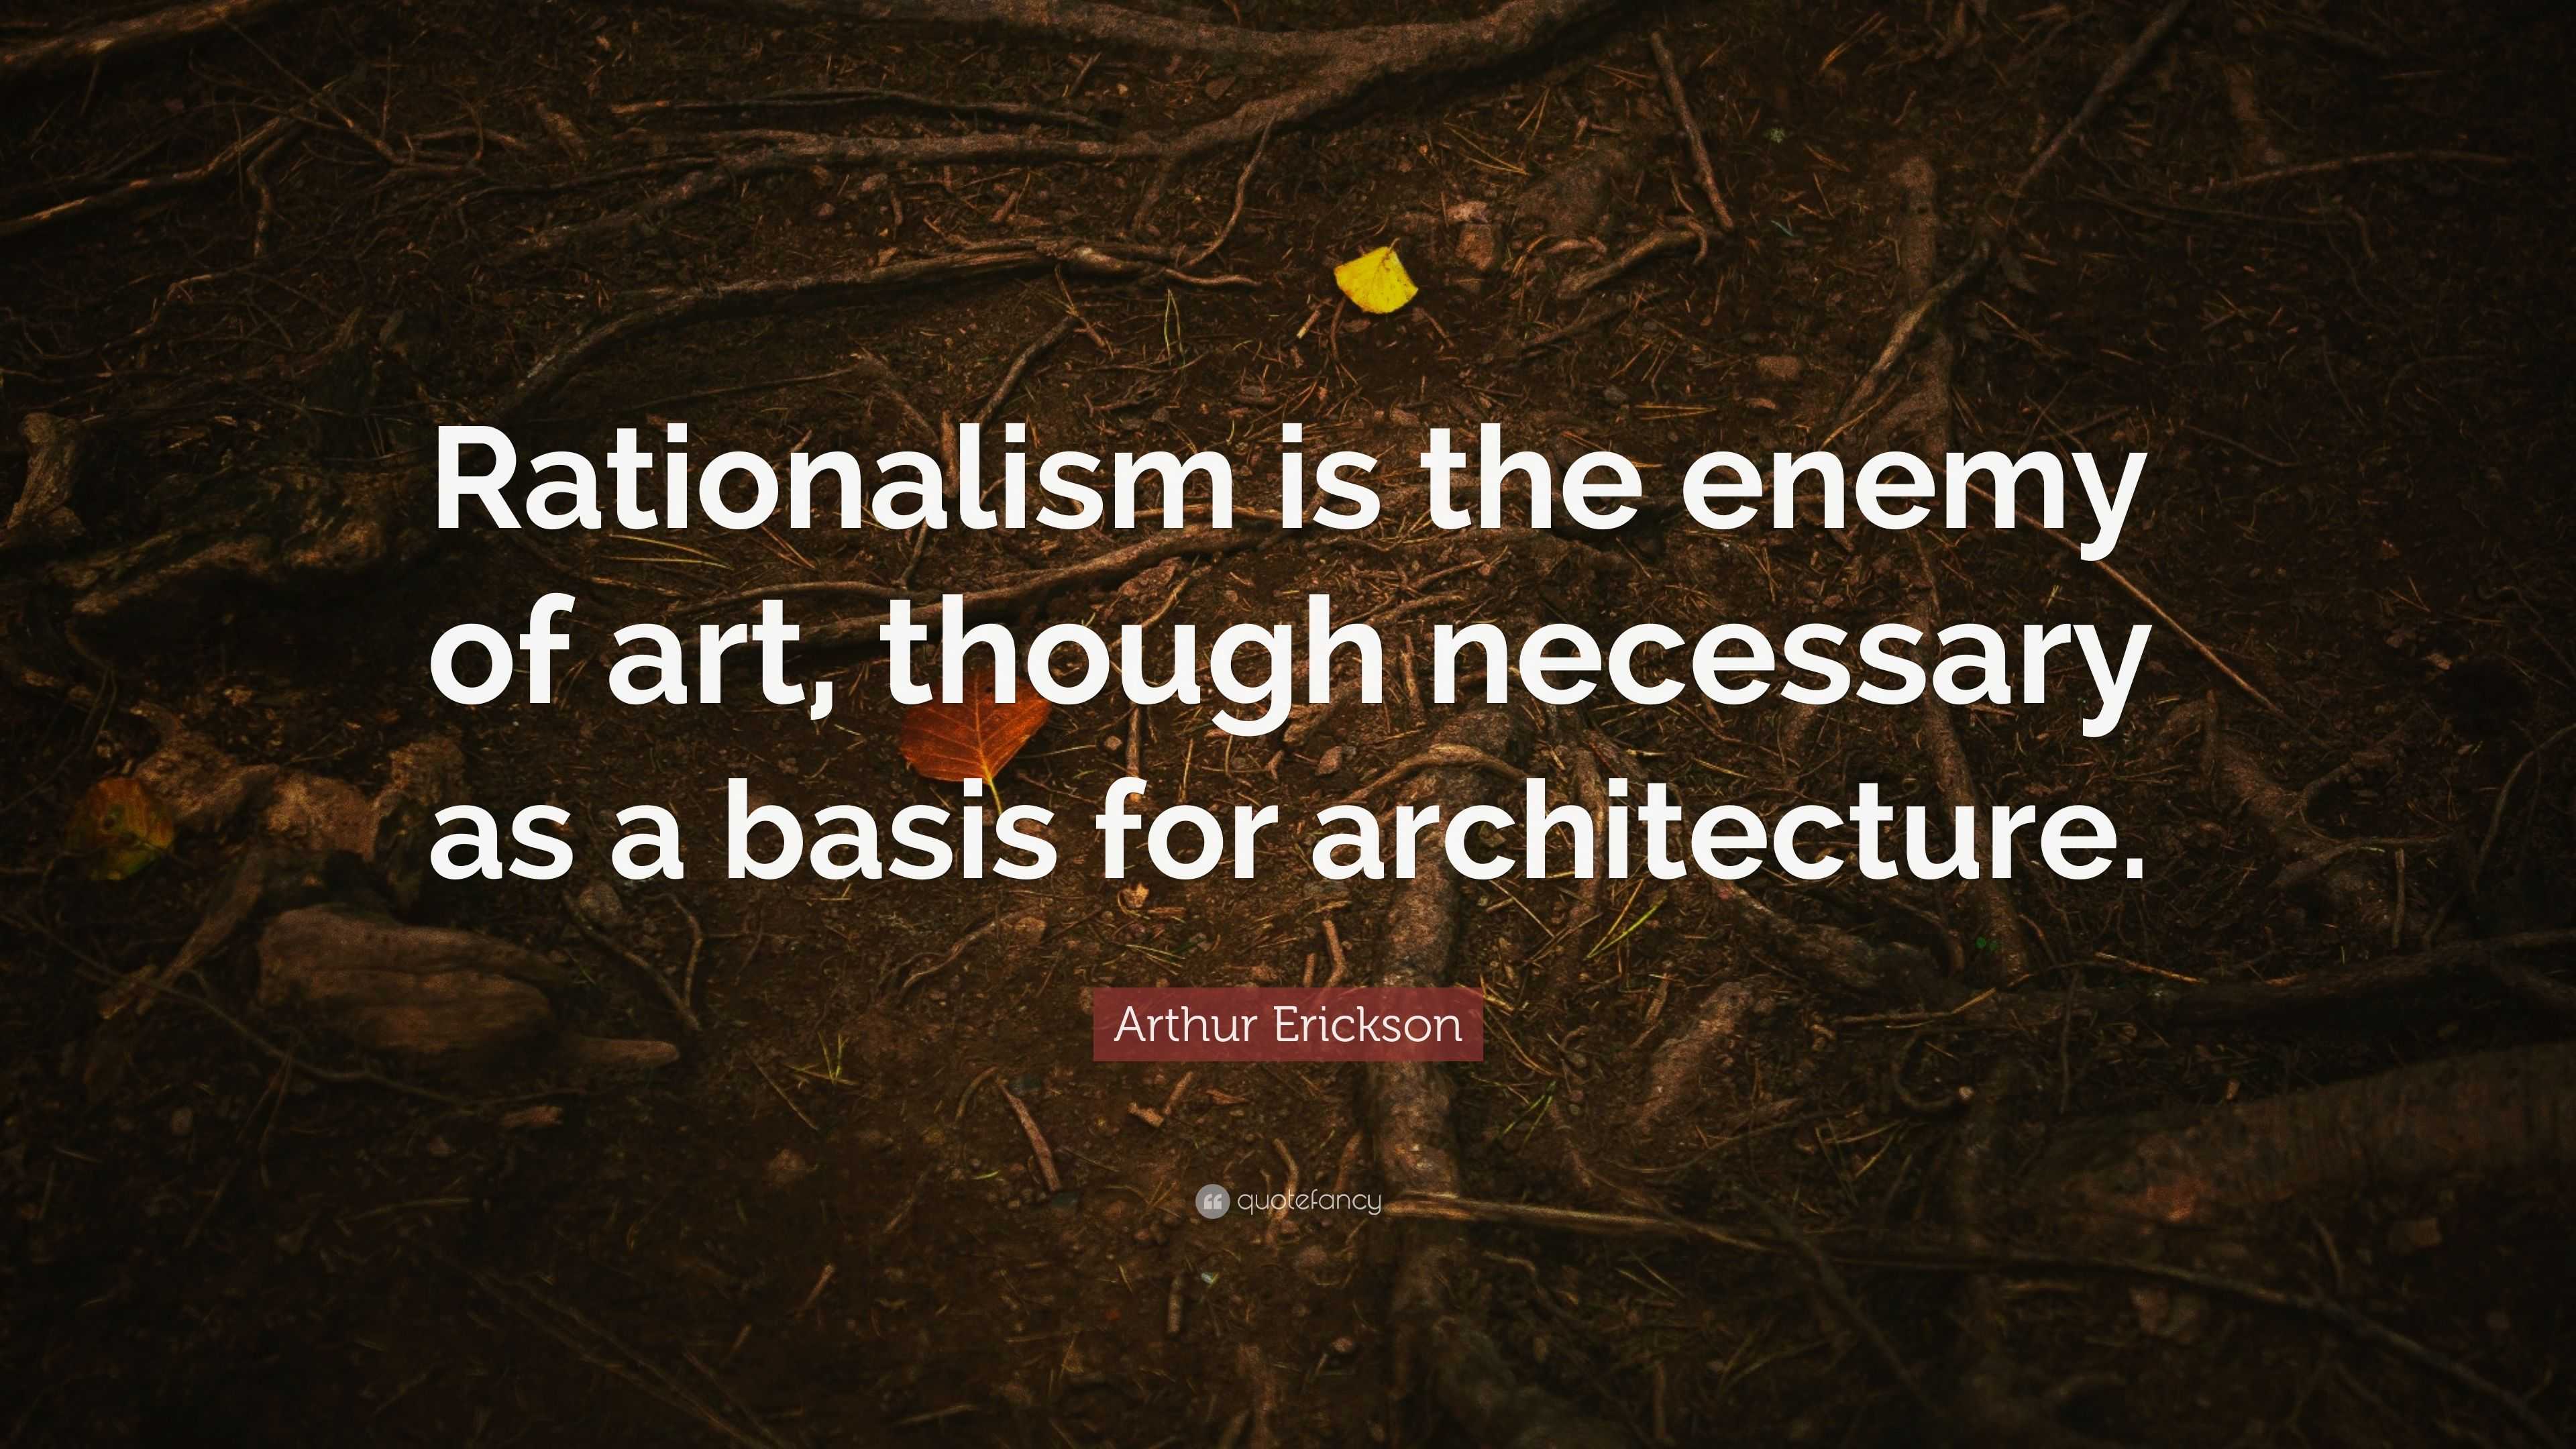 Arthur Erickson Quote: “Rationalism is the enemy of art, though